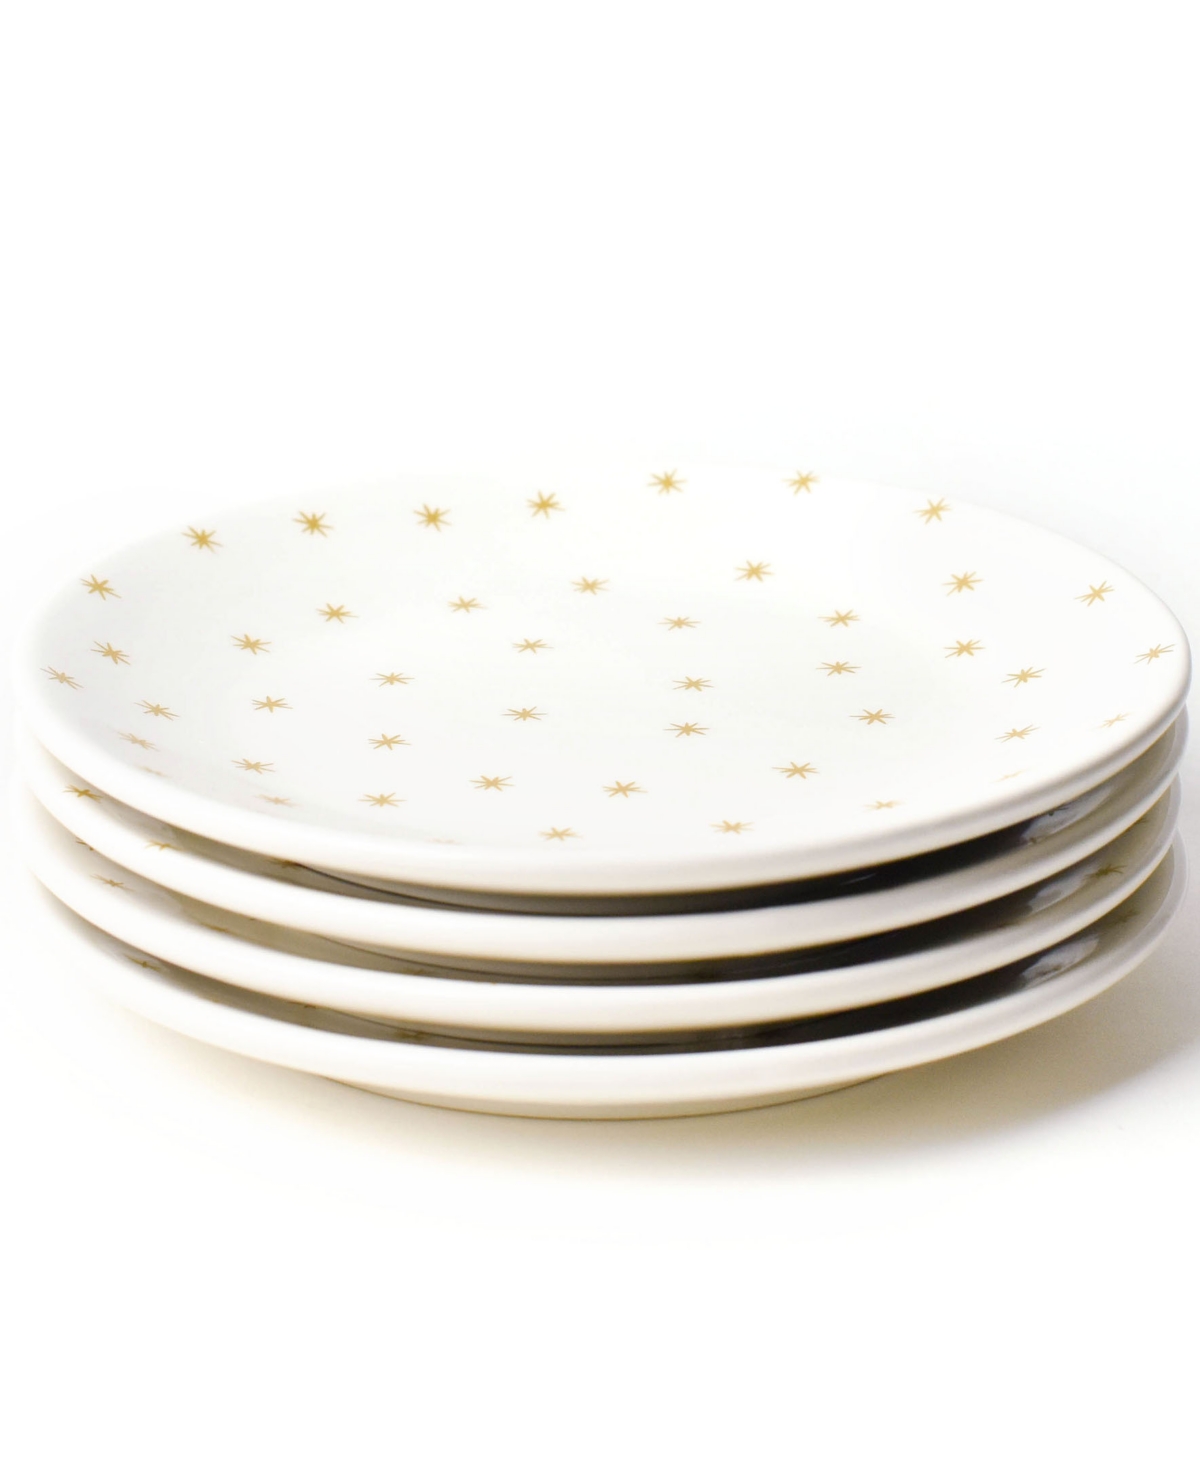 Gold-Tone Star Salad Plate Set of 4, Service for 4 - White